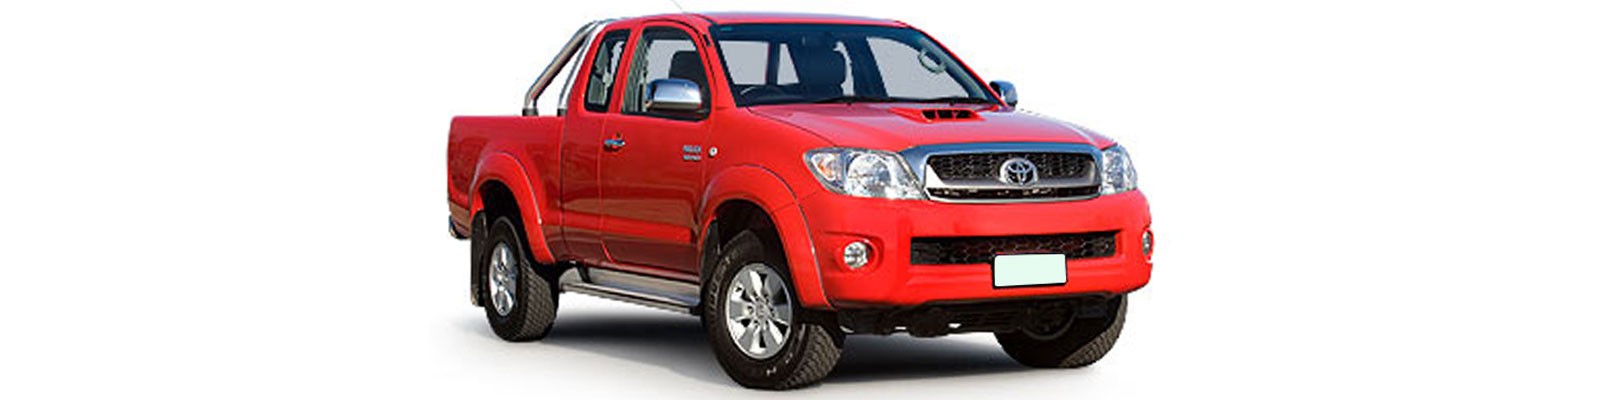 Accessories for Toyota Hilux Extra Cab 2009-2011